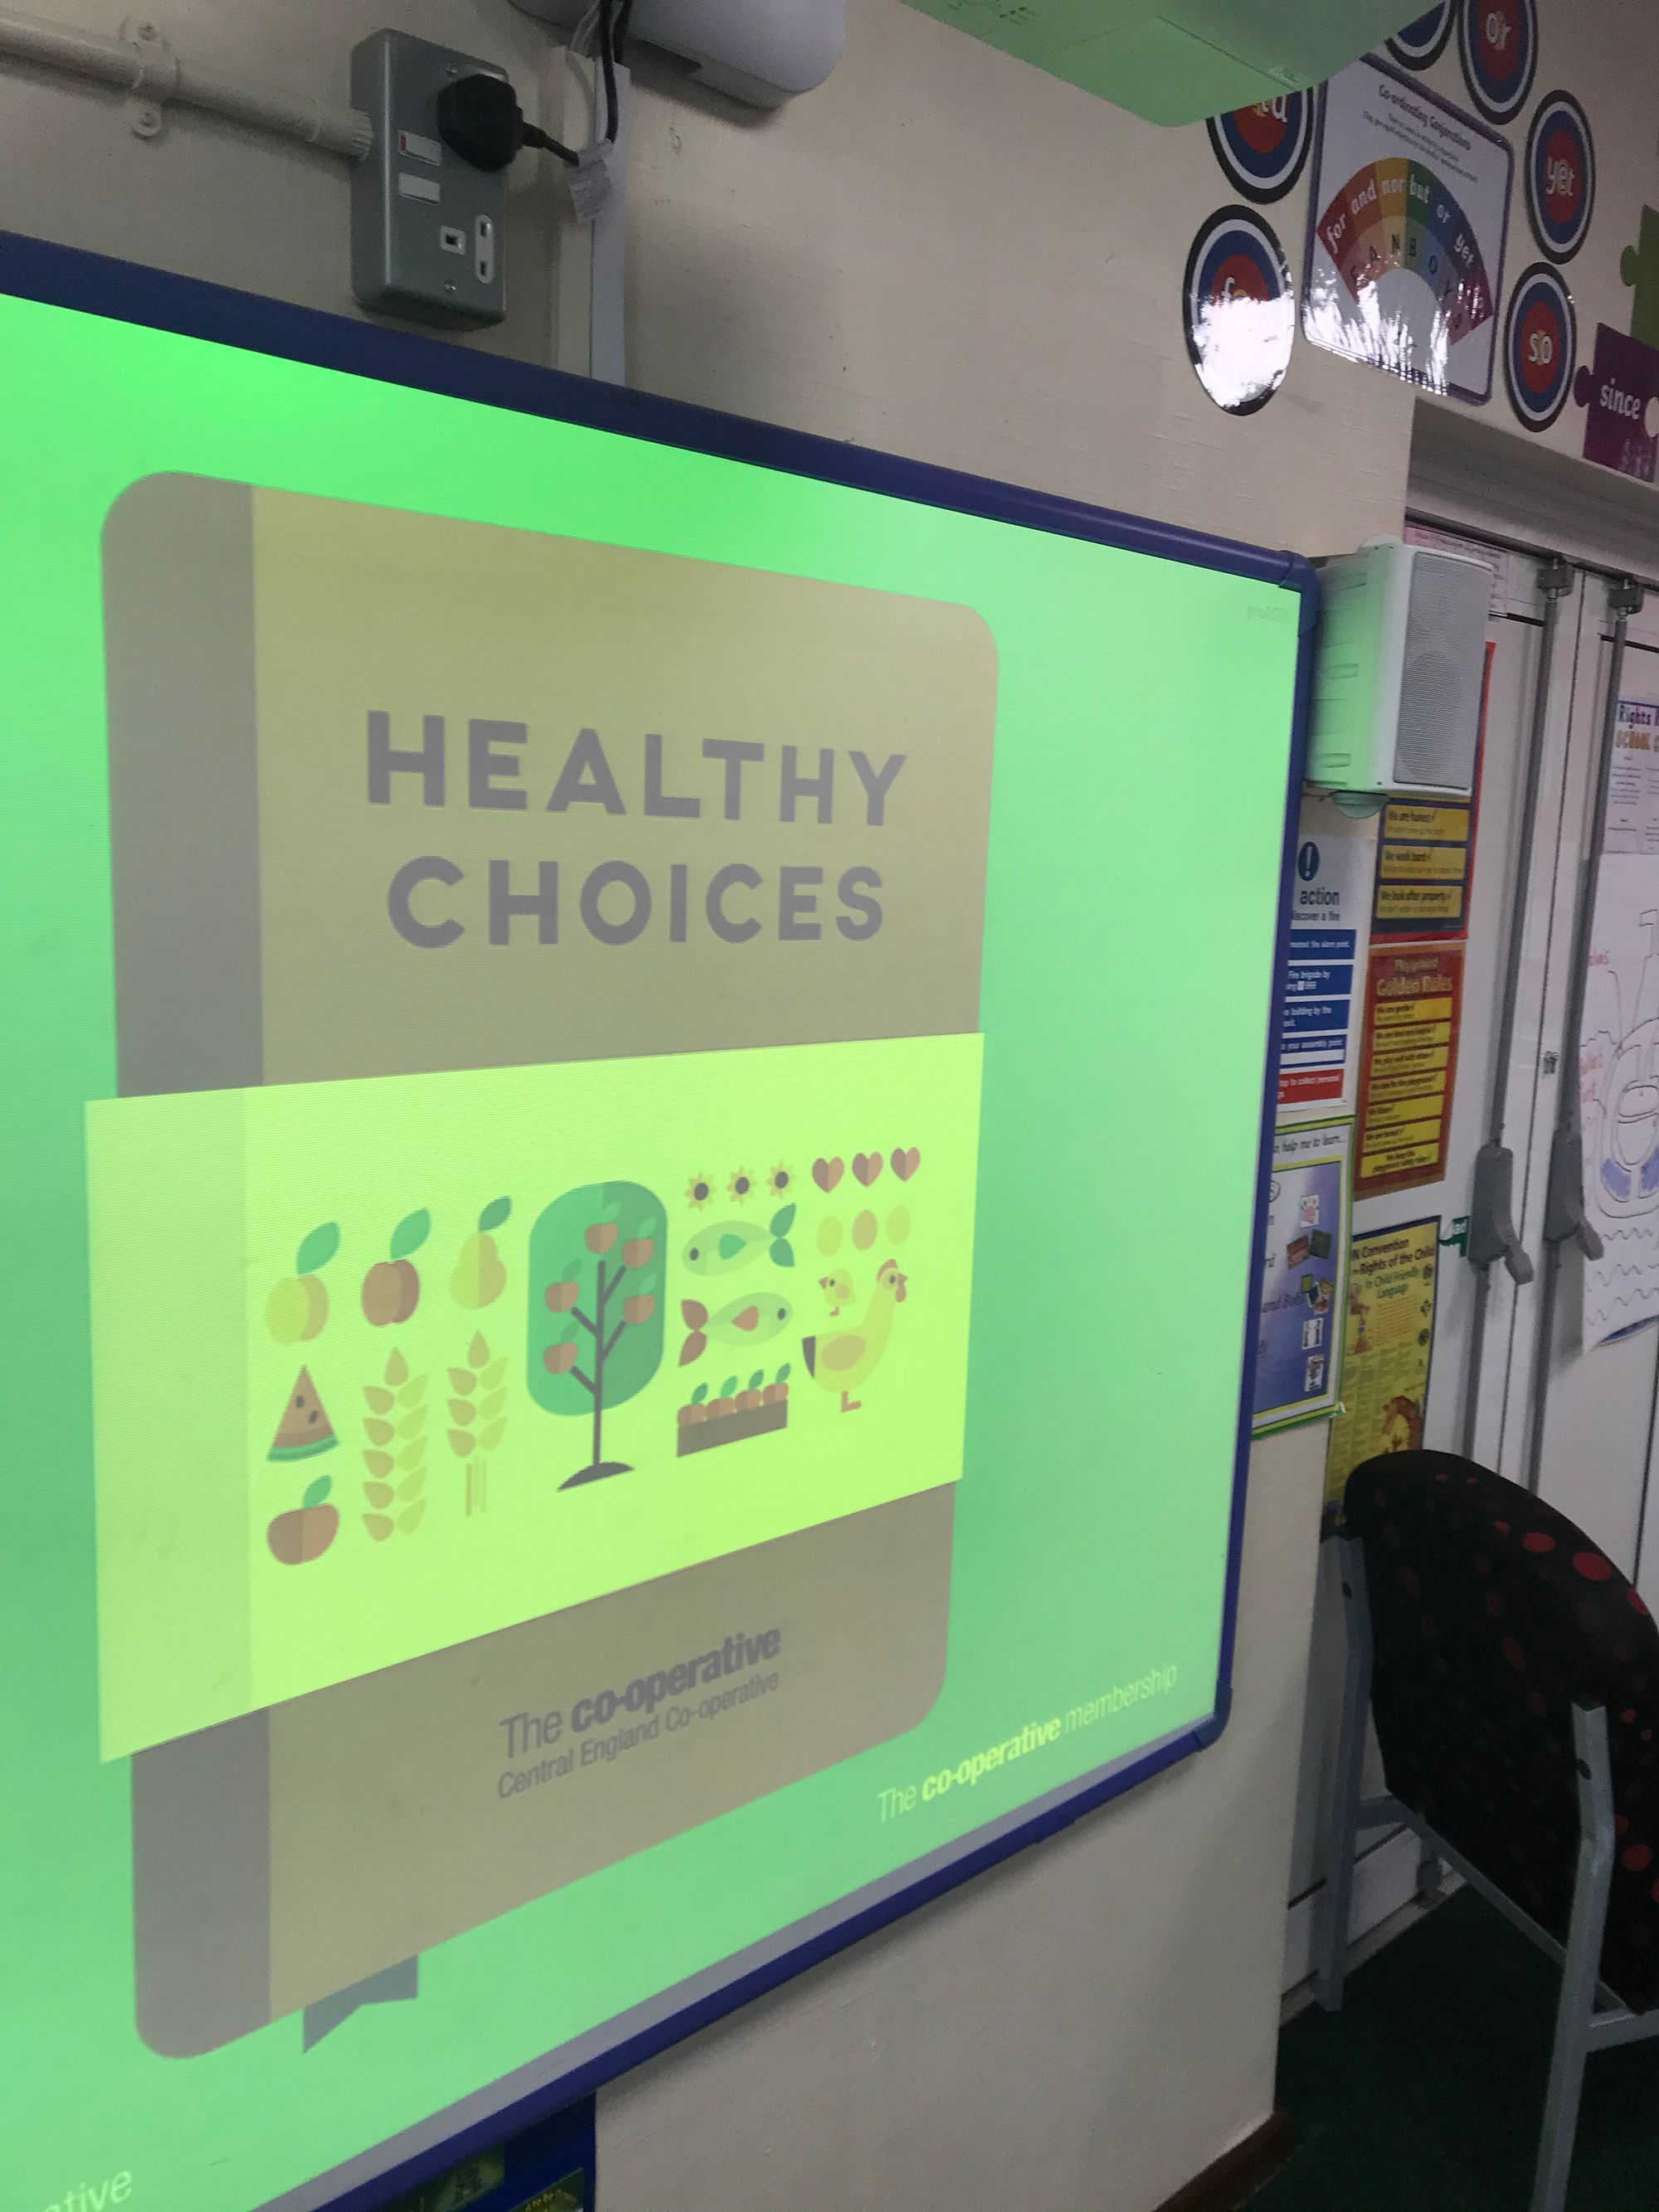 Central England Co-operative teaches youngsters about their Healthy Choices in Birmingham